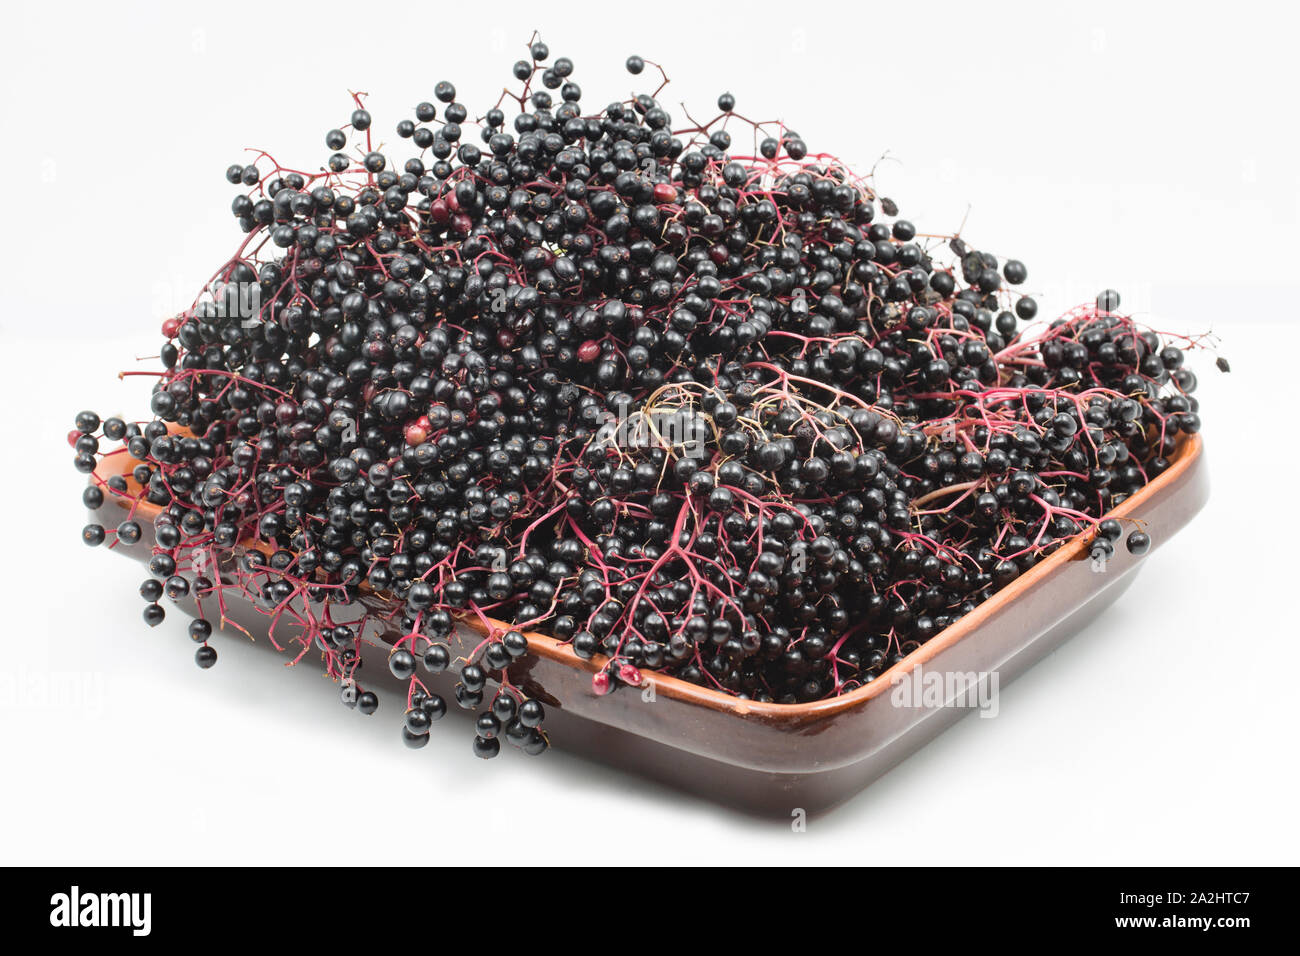 Elderberries, fruit of the elder tree, Sambucus nigra, that have been foraged from elder trees growing along footpaths to be used to make syrup. Great Stock Photo